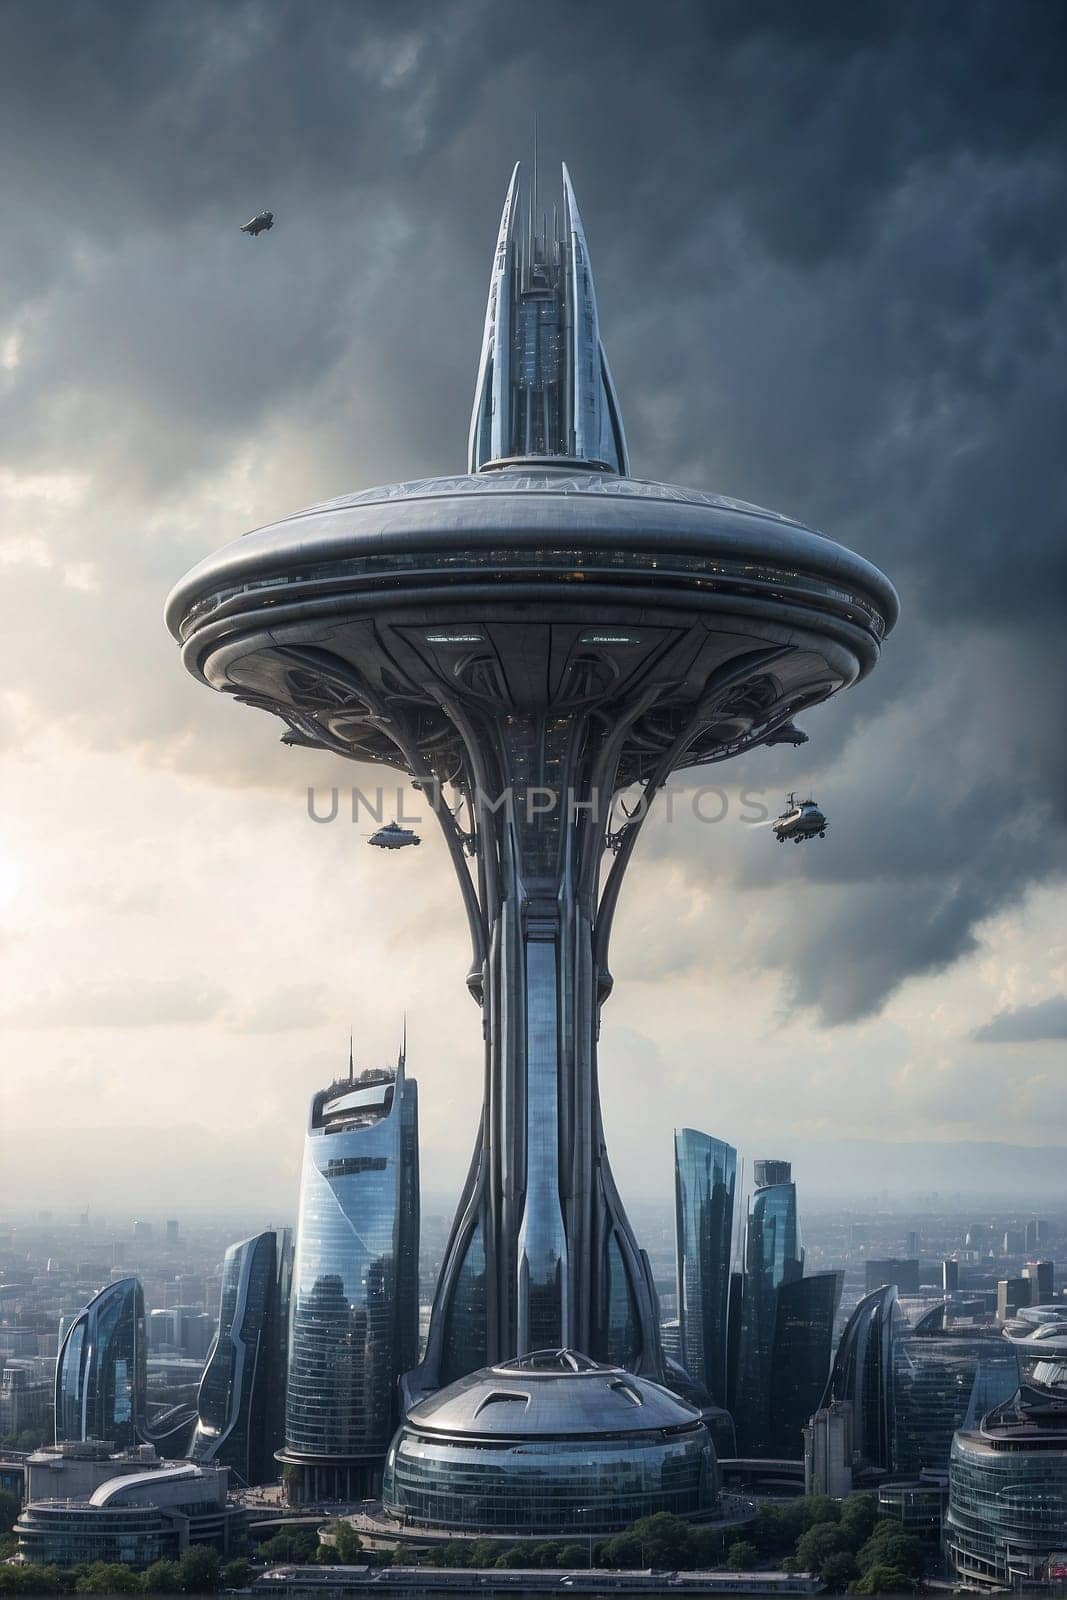 A modern city with towering buildings is seen under a cloudy sky, creating a futuristic urban environment.